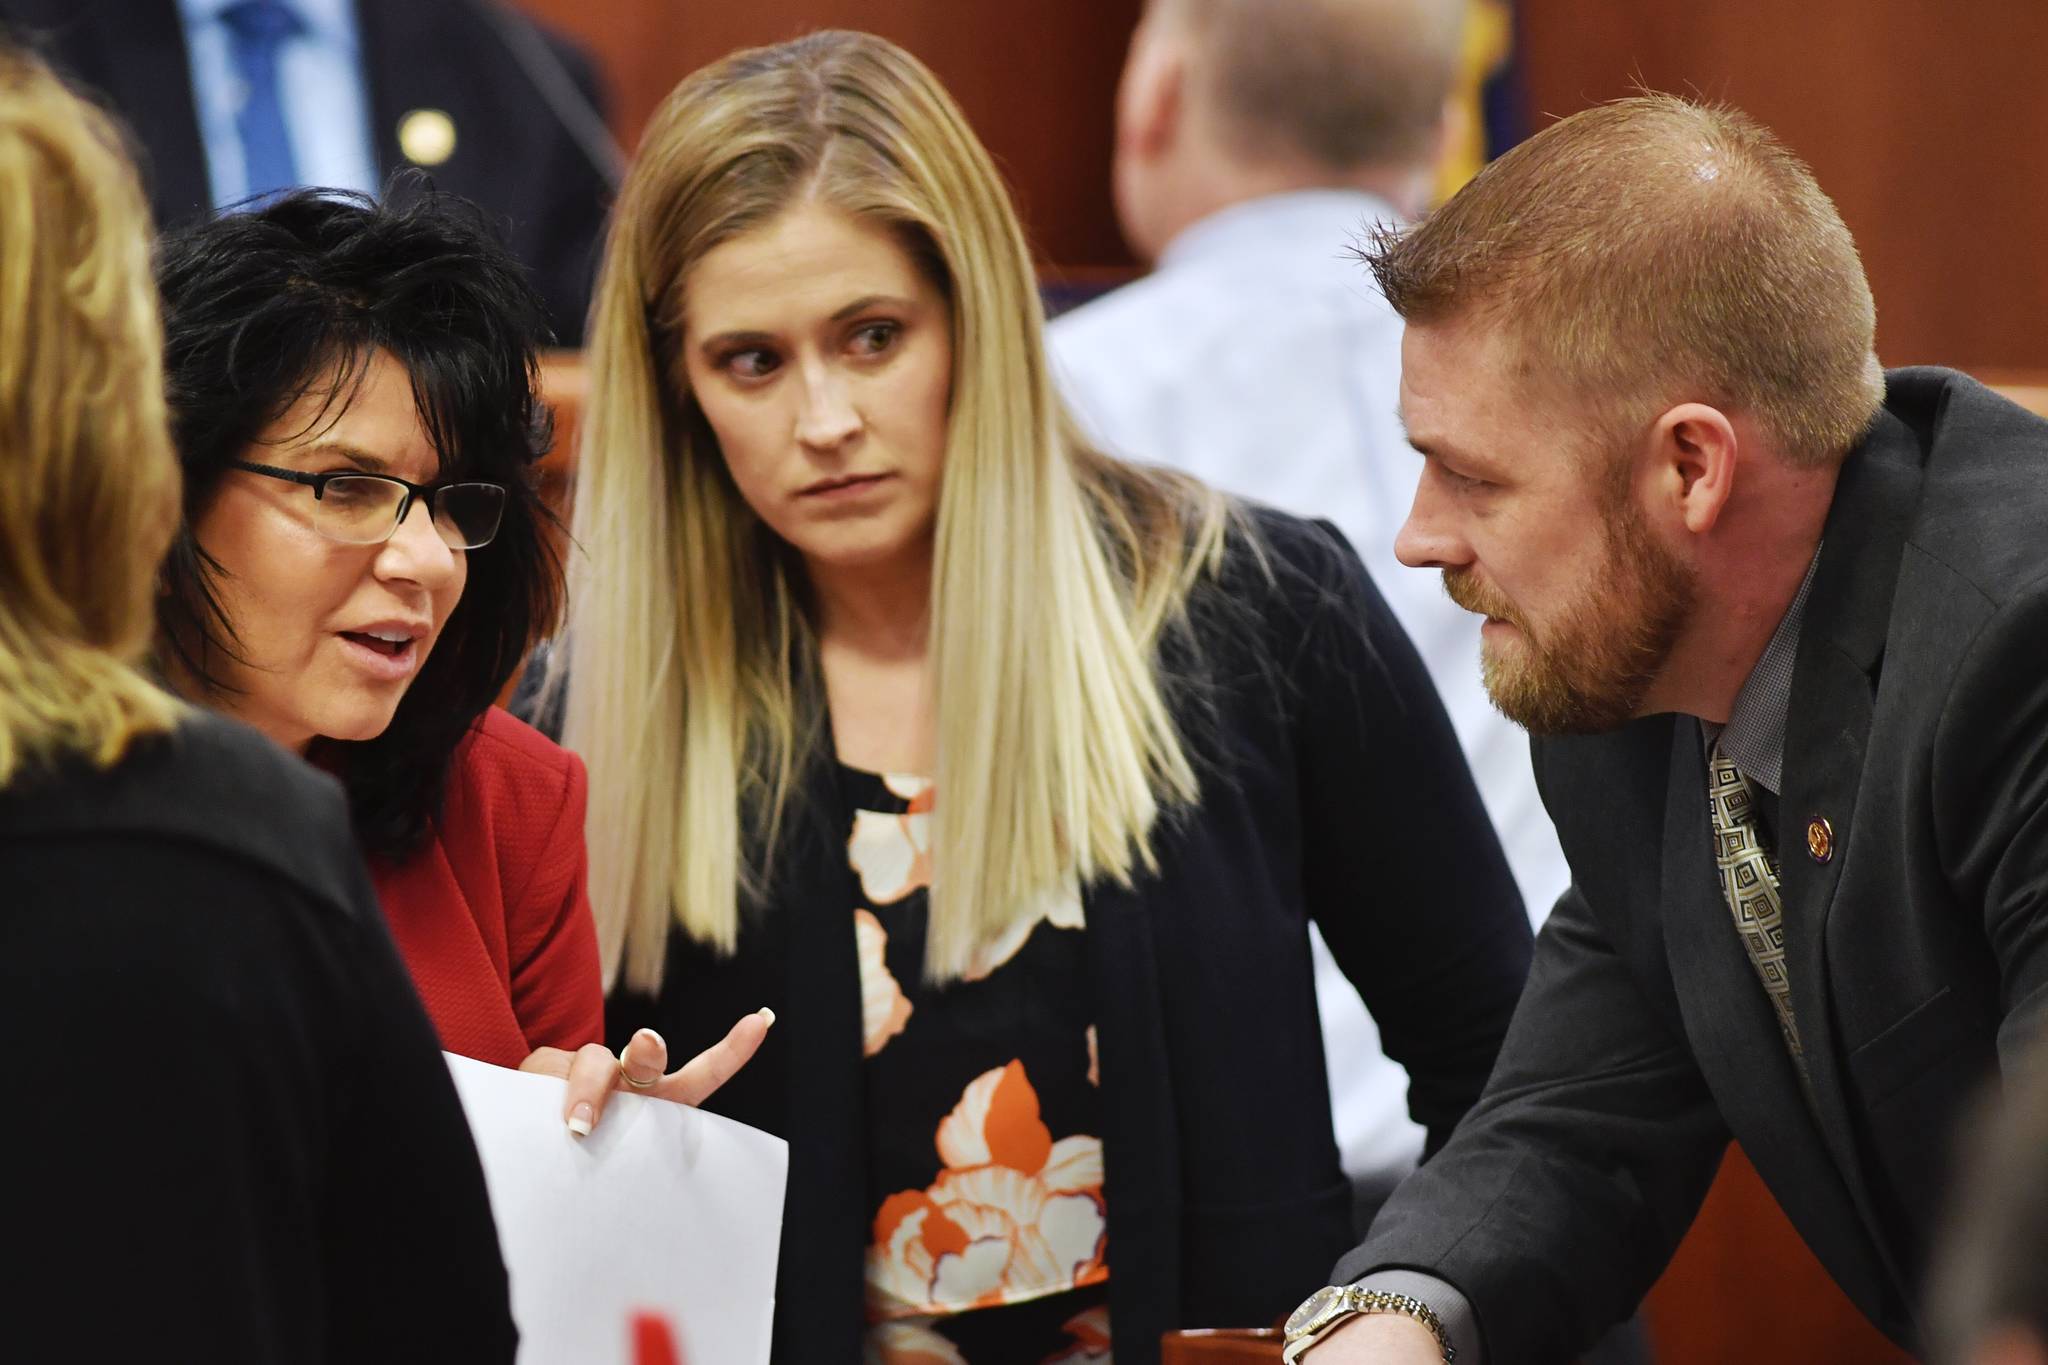 Rep. Cathy Tilton, R-Wasilla, left, speaks with Rep. Sara Rasmussen, R-Anchorage, and Rep. Josh Revak, R-Anchorage, on the House floor as amendments to the budget are proposed on Tuesday, April 9, 2019. (Michael Penn | Juneau Empire)